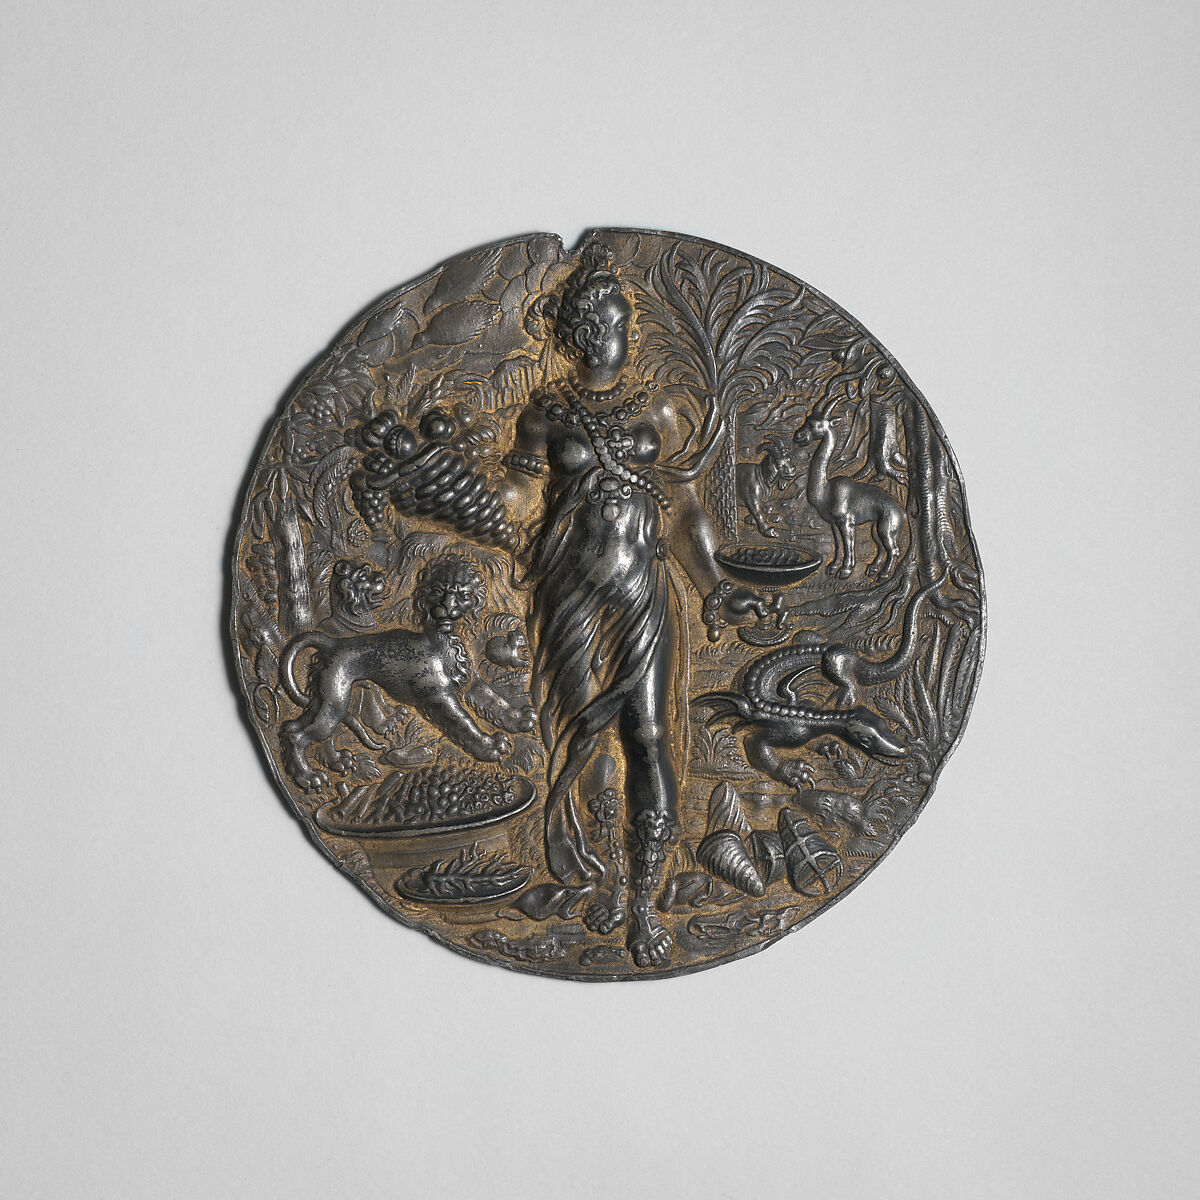 Personification of Africa, Lead and gilding, German